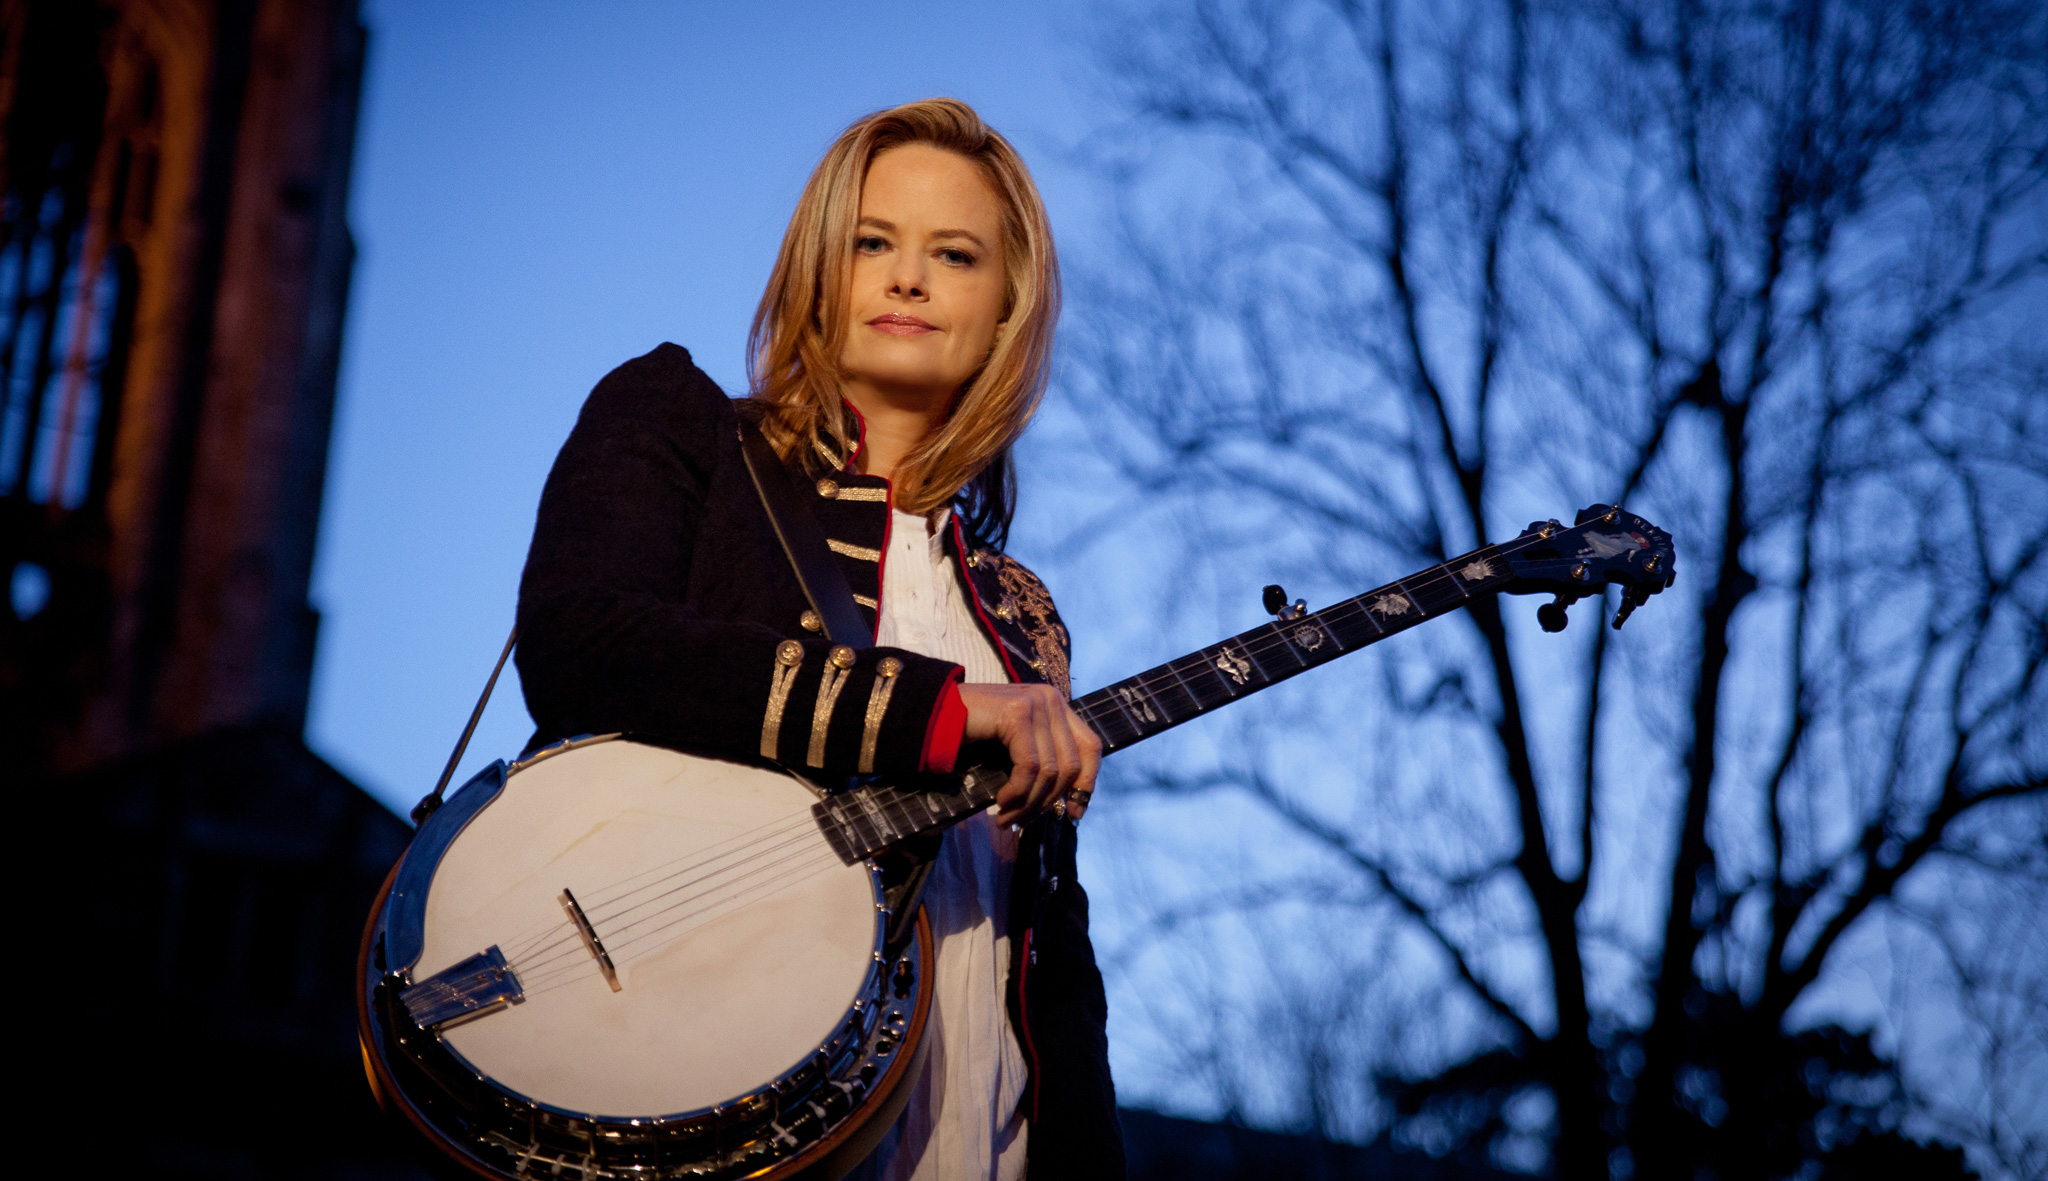 Alison Brown standing in front of a blue sky and silhouette of a tree. She is looking down at the camera and holding a banjo